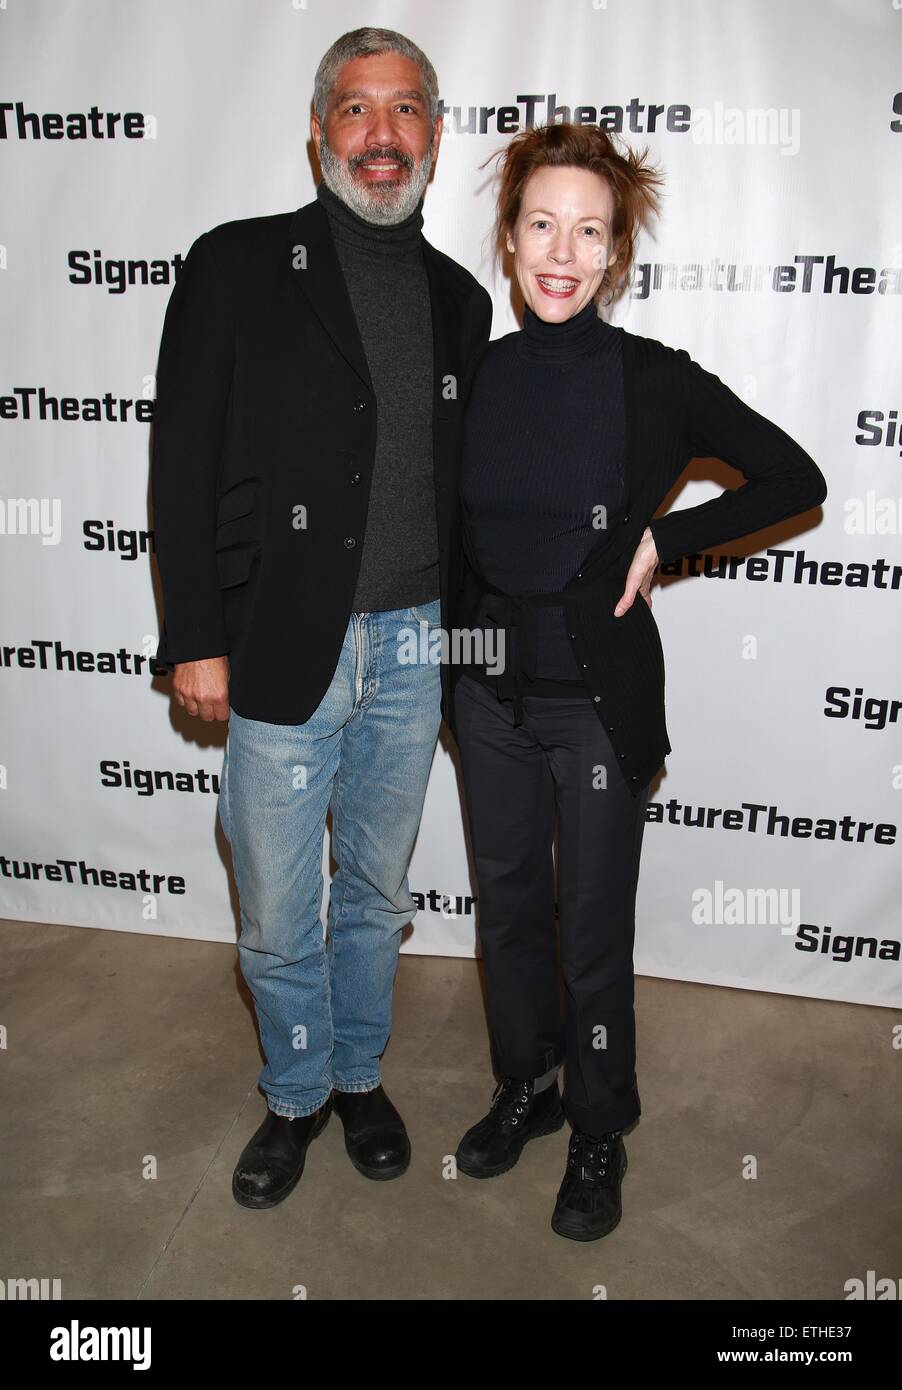 Opening night of 'Big Love' held at the Signature Center - Arrivals  Featuring: Peter Francis James, Veanne Cox Where: New York City, New York, United States When: 23 Feb 2015 Credit: Joseph Marzullo/WENN.com Stock Photo